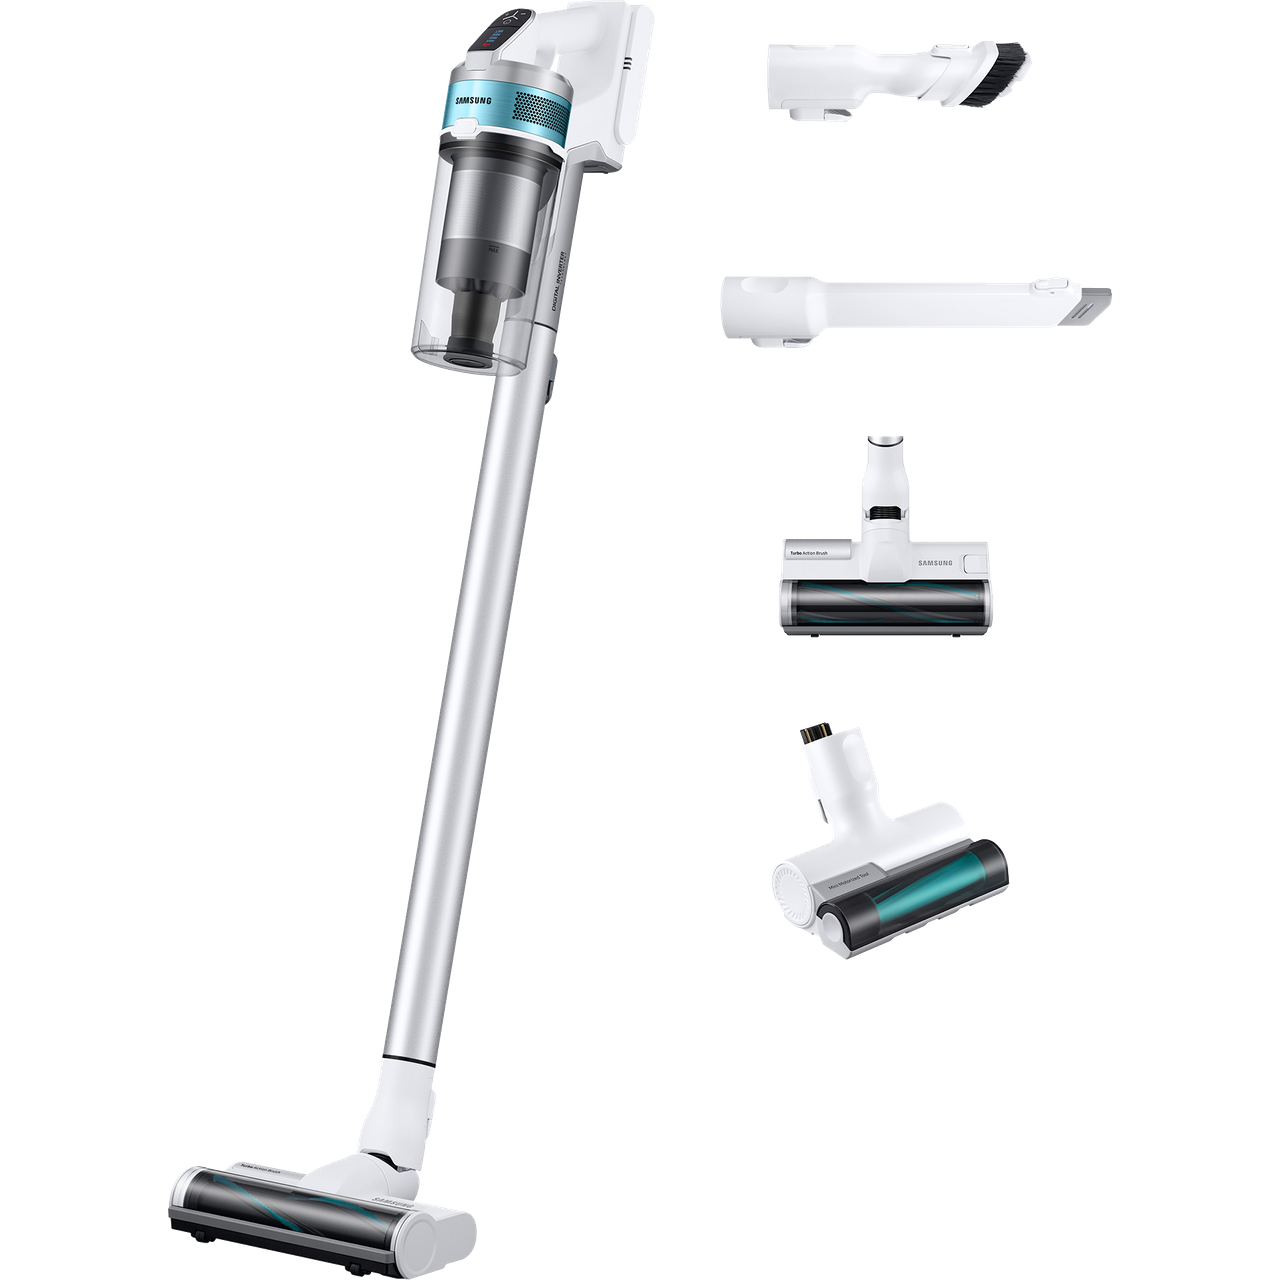 Samsung Jet™ 70 Pet VS15T7032R1 Cordless Vacuum Cleaner with up to 40 Minutes Run Time - White / Green